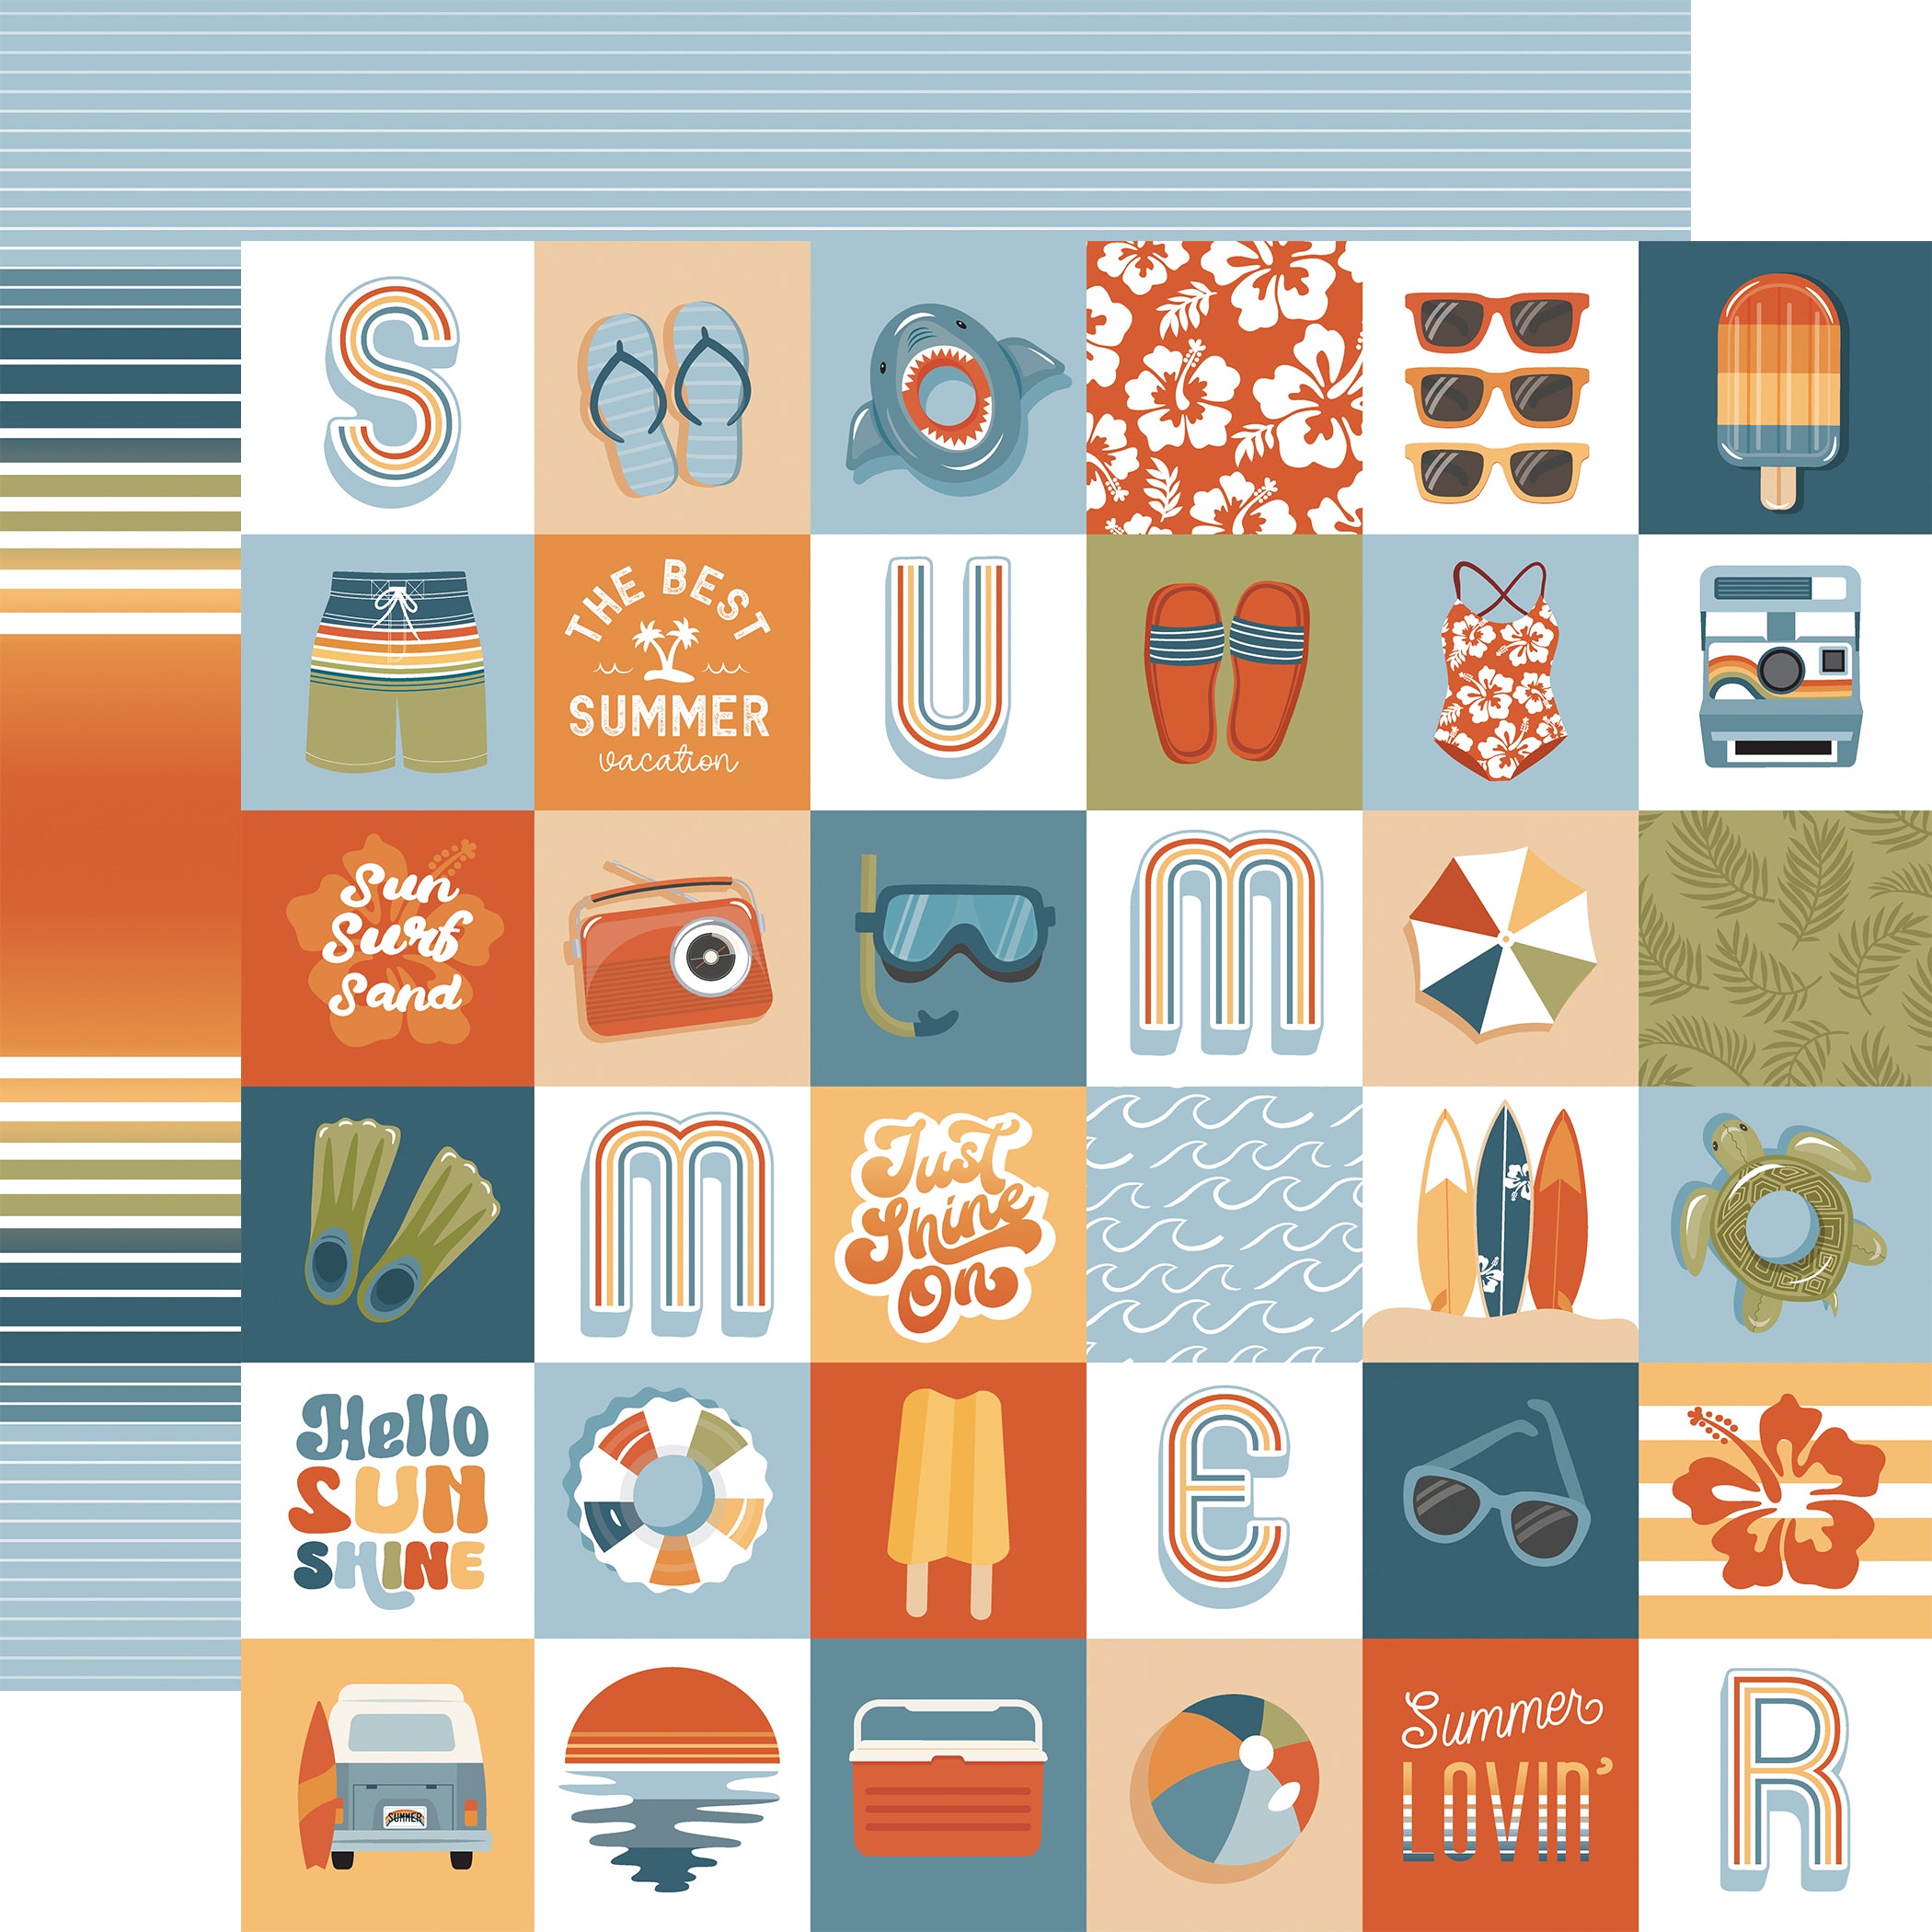 Summer Vibes Collection 12 x 12 Scrapbook Collection Kit by Echo Park Paper